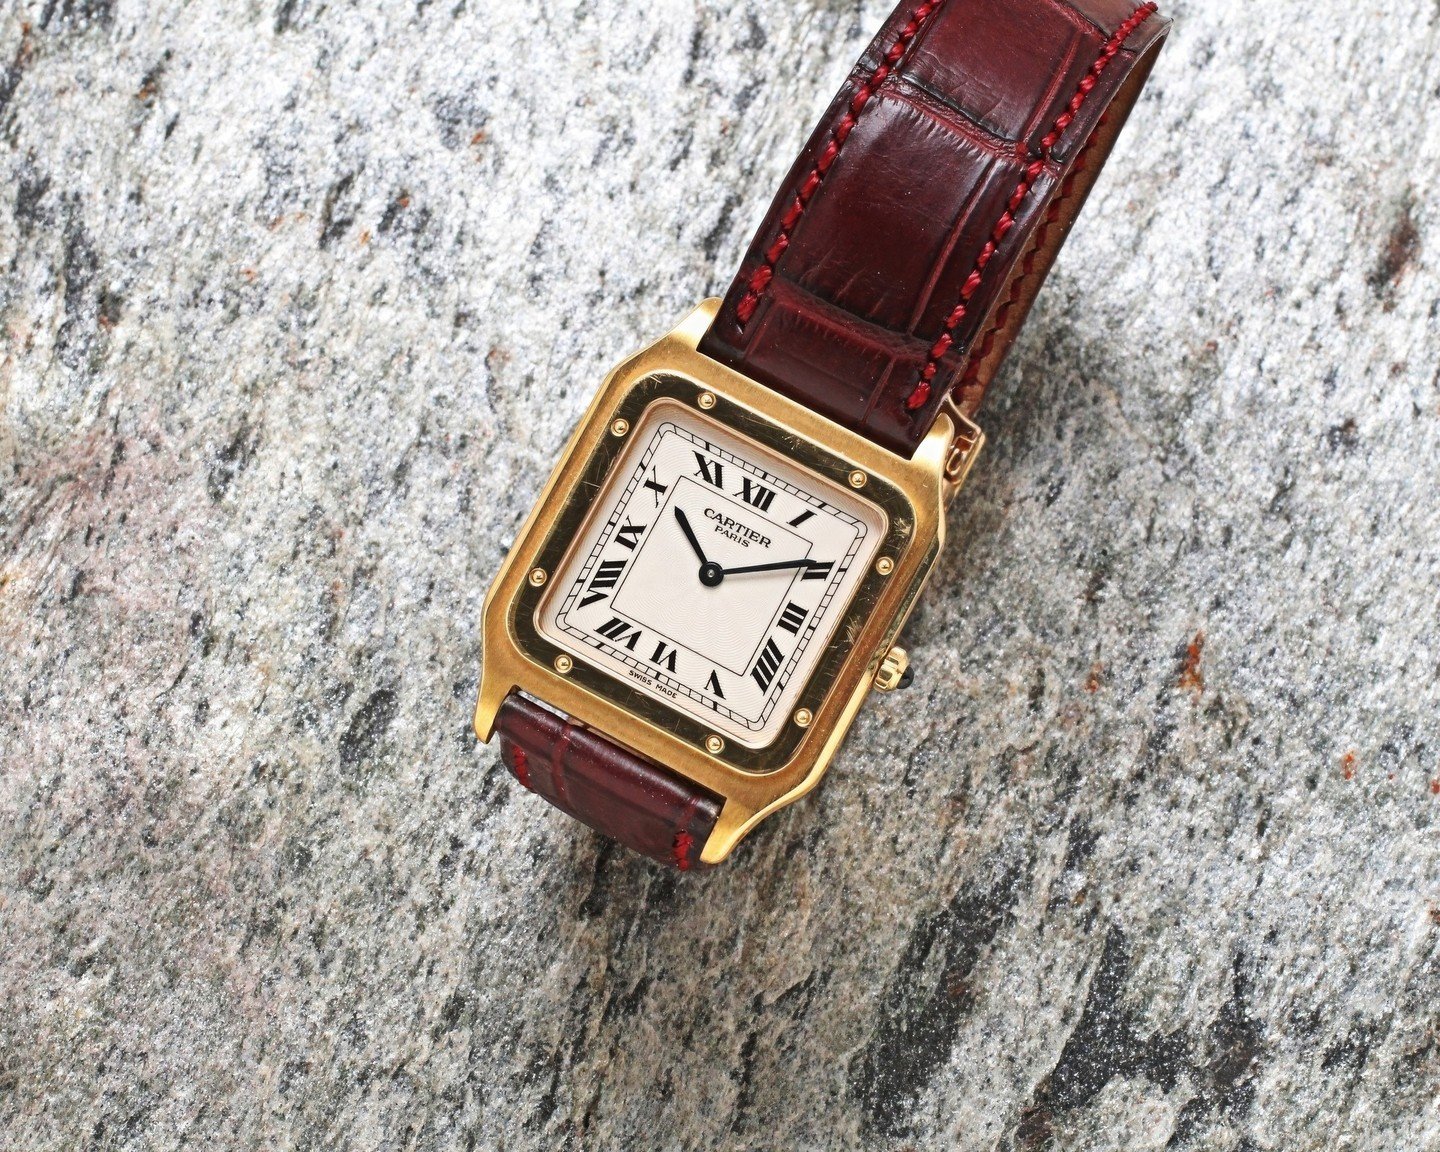 An excellent example of the Cartier Santos Dumont 1576B from the Collection Privee with its perfectly preserved proportions and distinctive aesthetic that transcends across all eras.